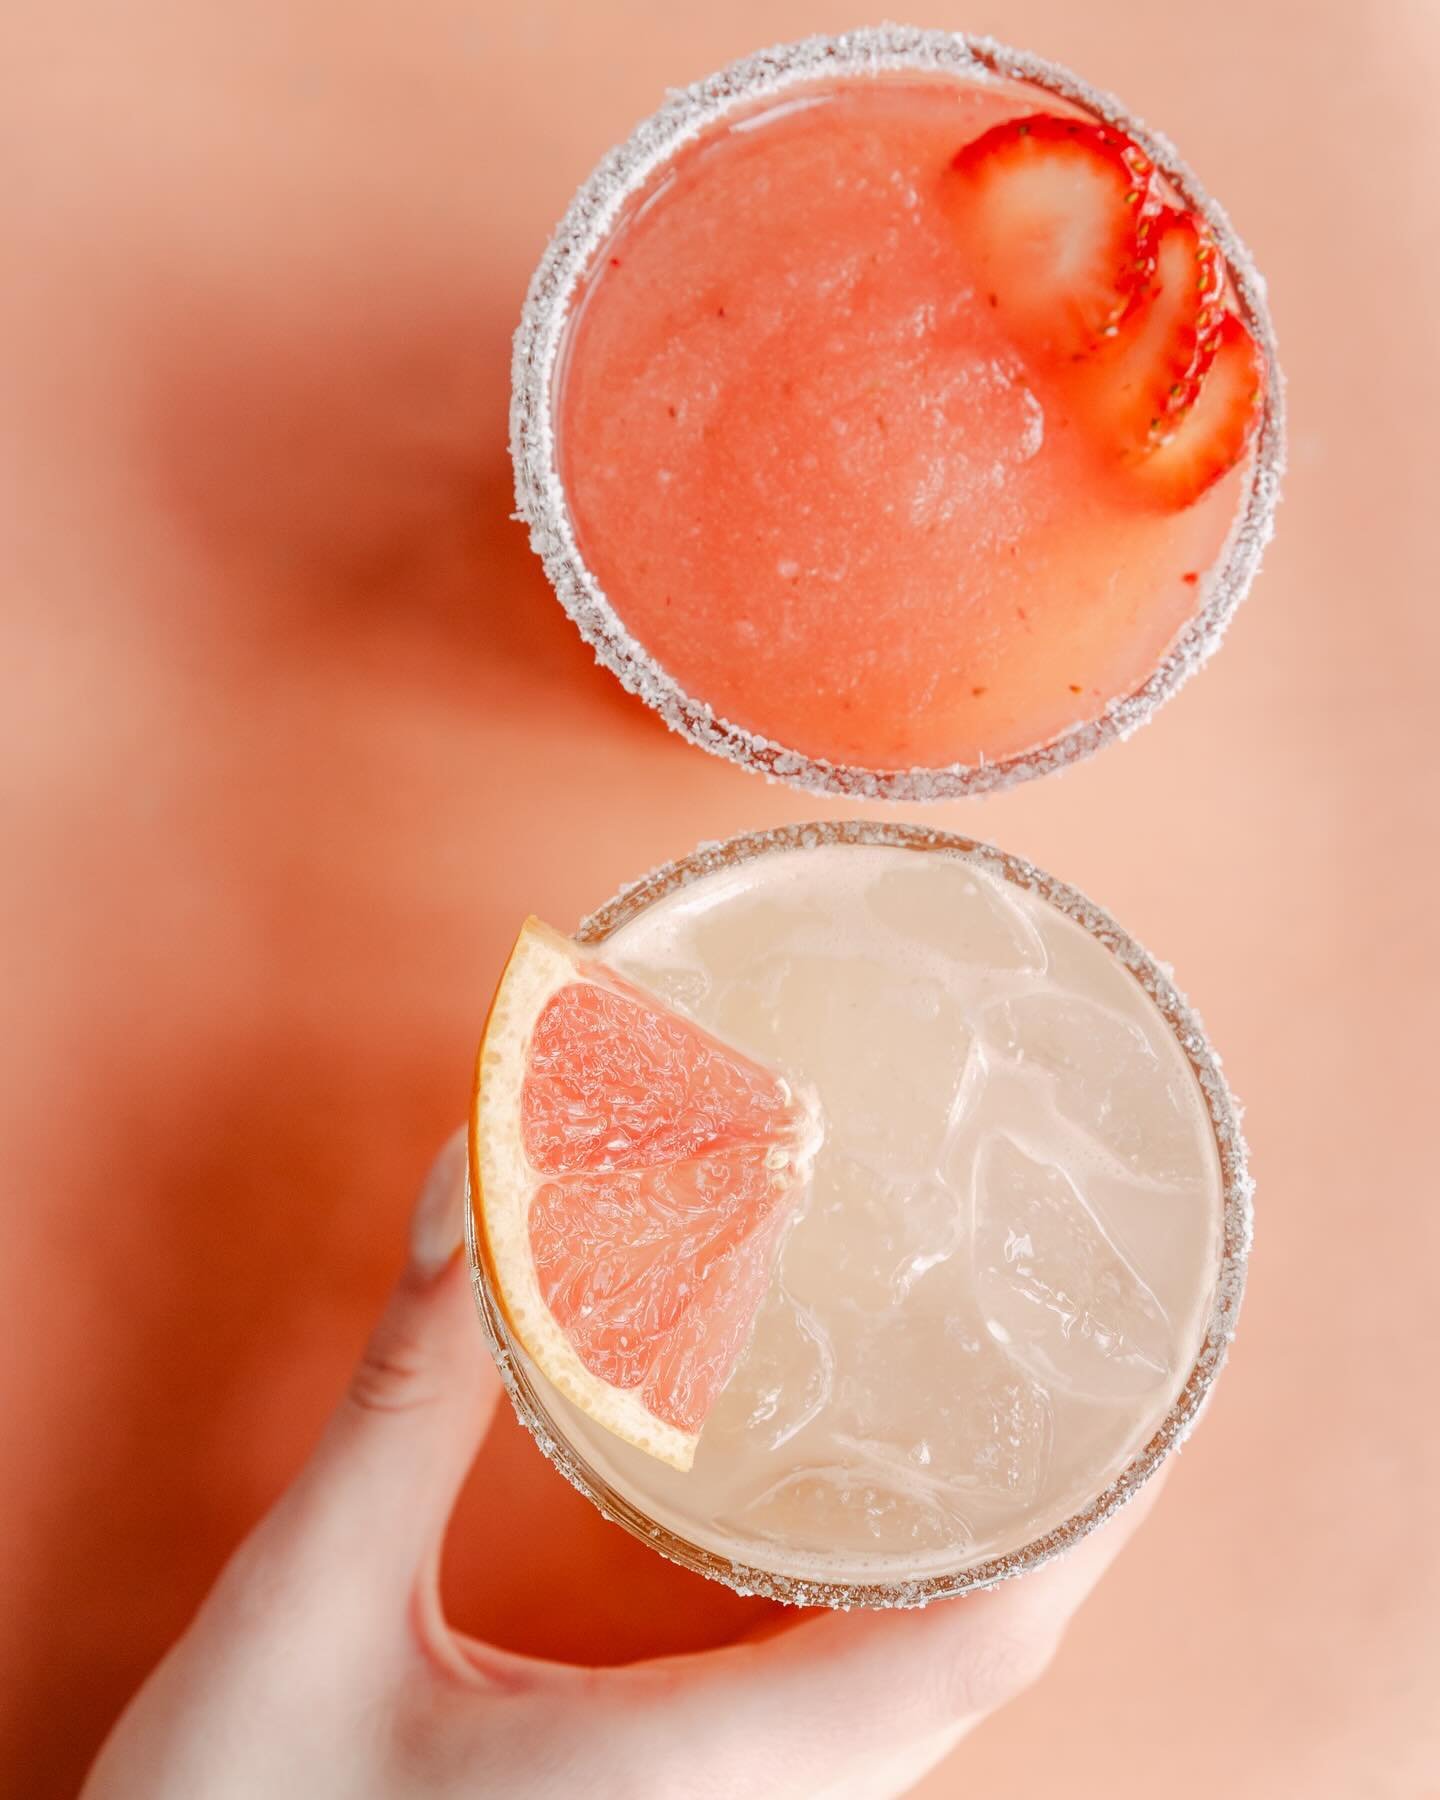 Too early to talk about margaritas? We don&rsquo;t think so&hellip; 

Which one are you choosing, our Pure Love or our Mezchele?